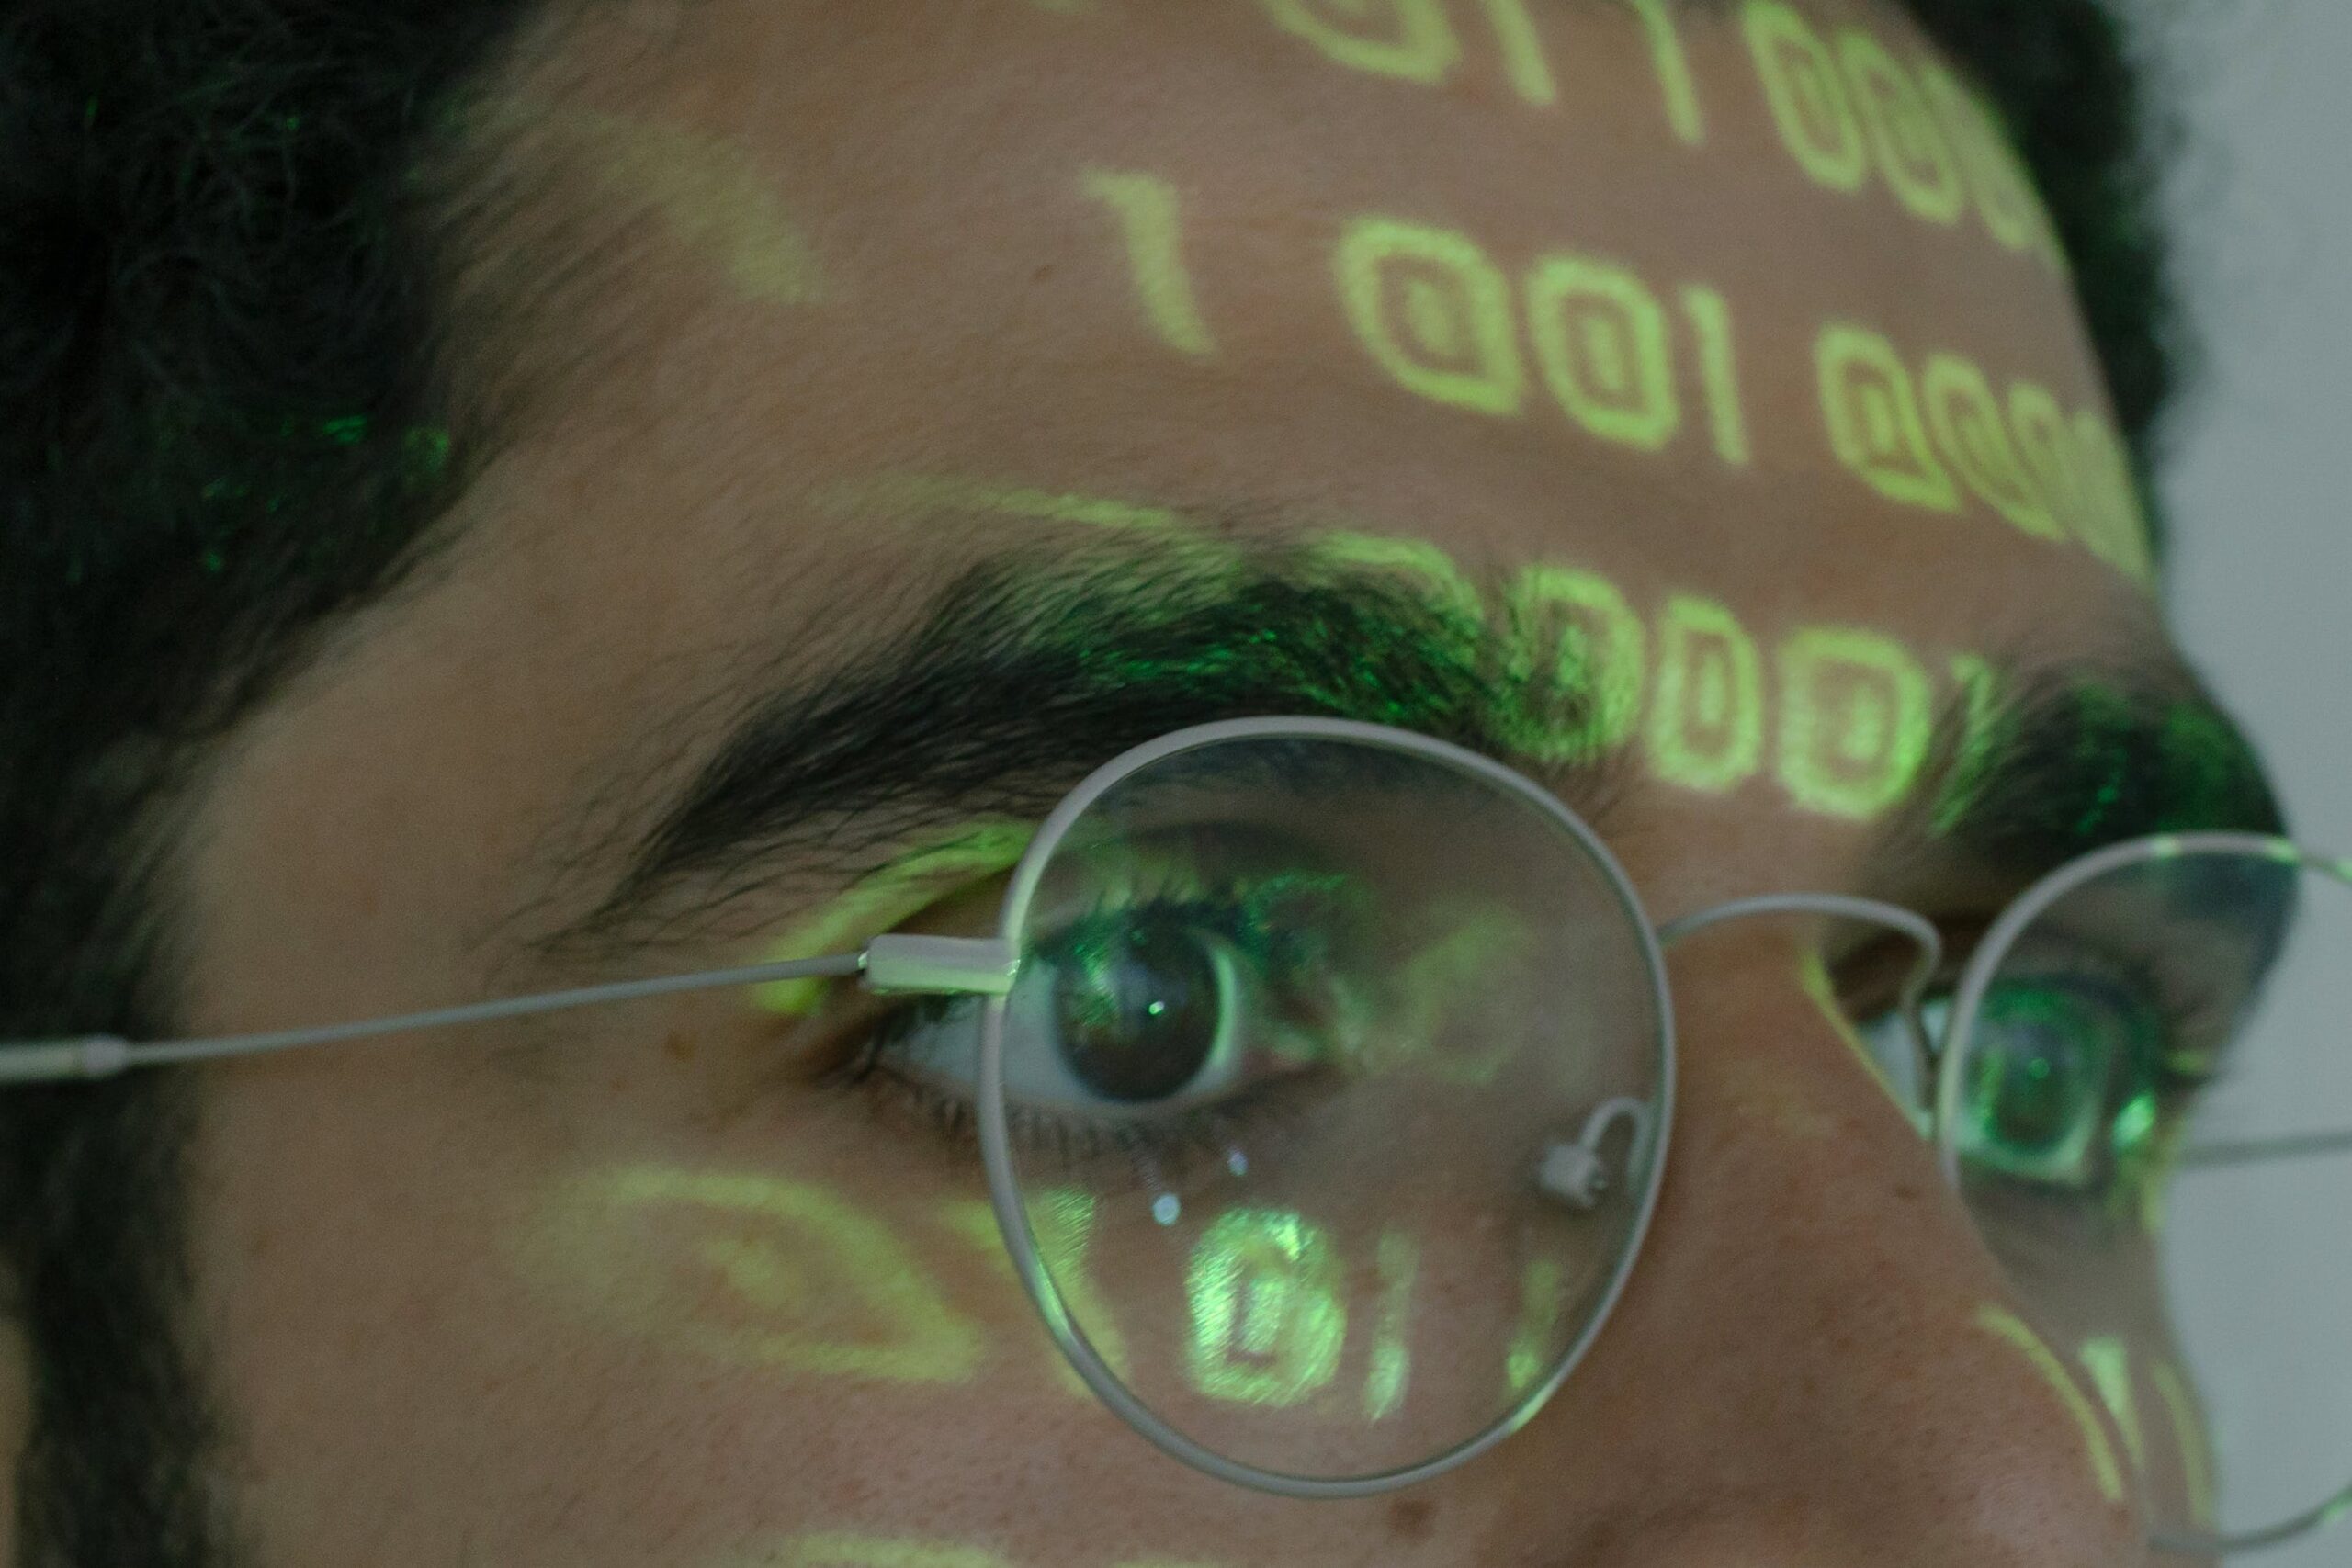 A close up of the face of a dark haired man in glasses with green computer code shining on his face